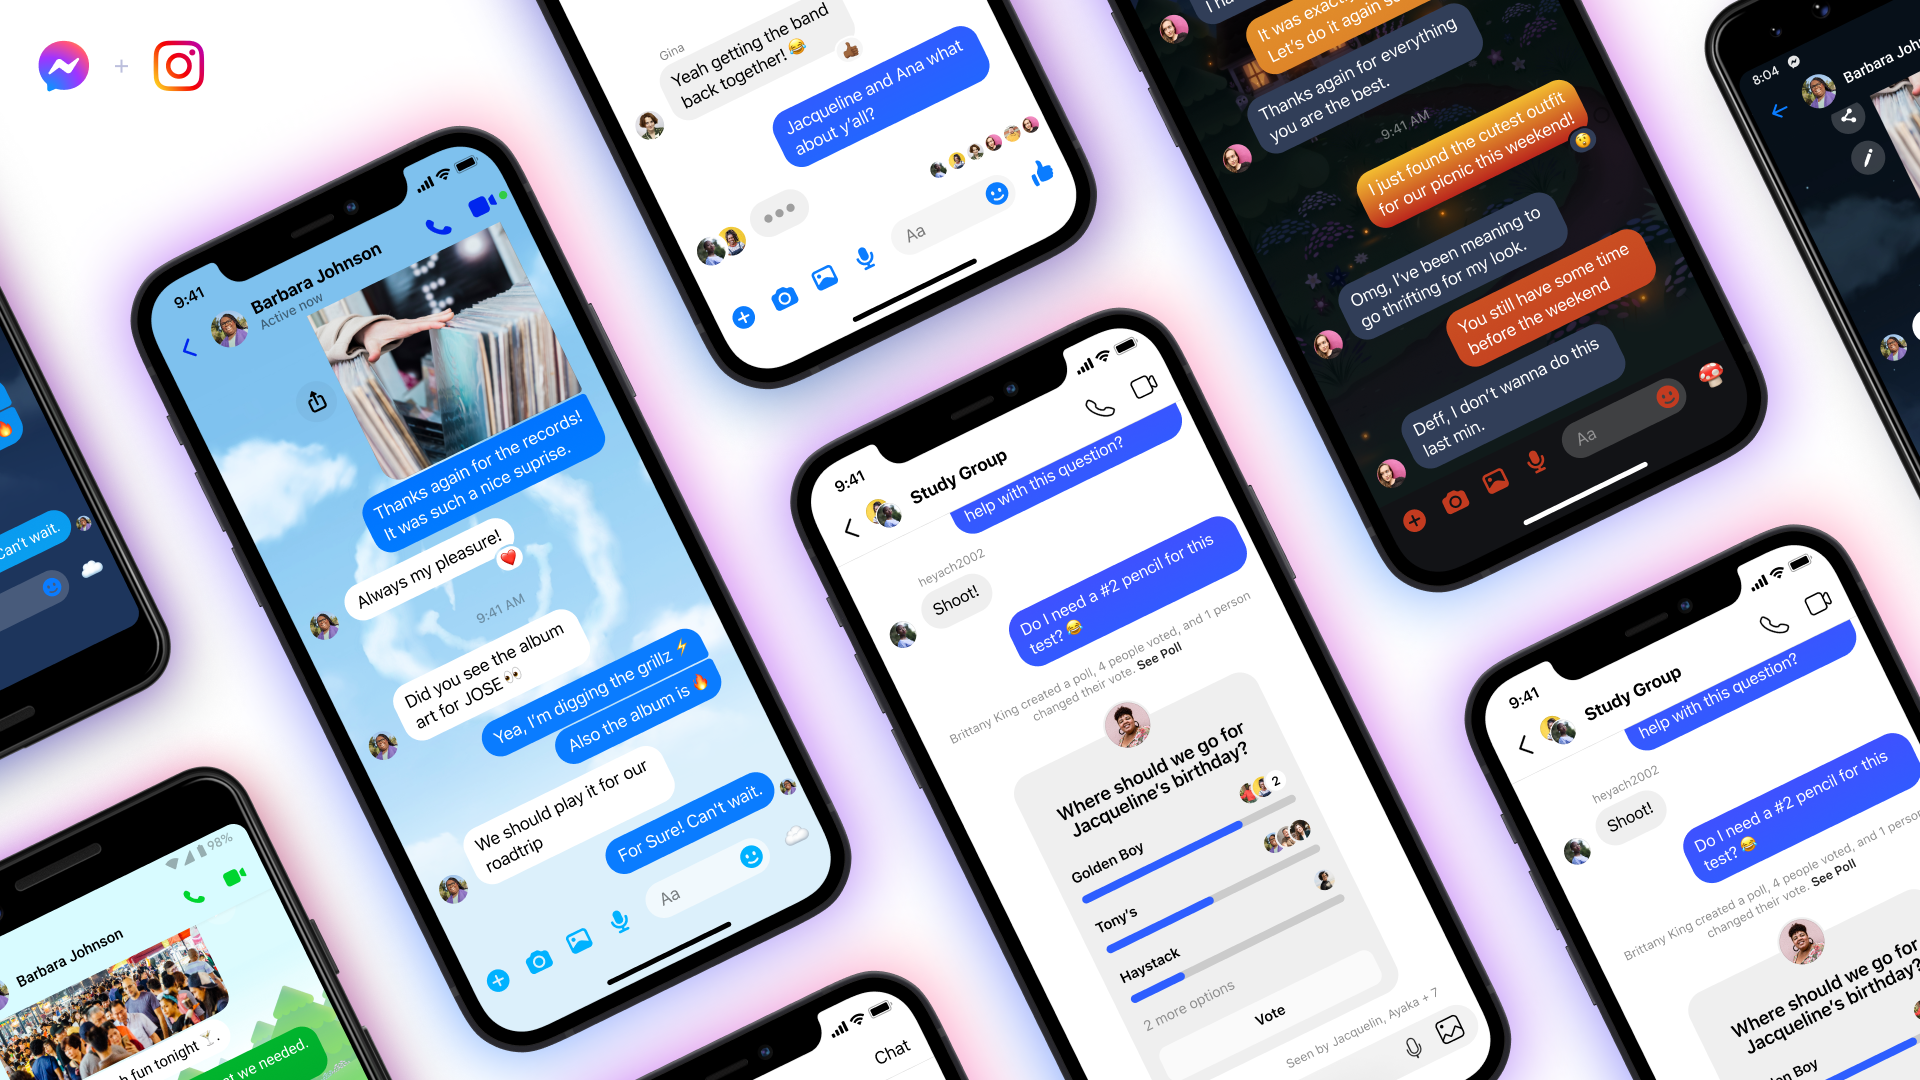 Shareable Chat Folders, Custom Wallpapers and More